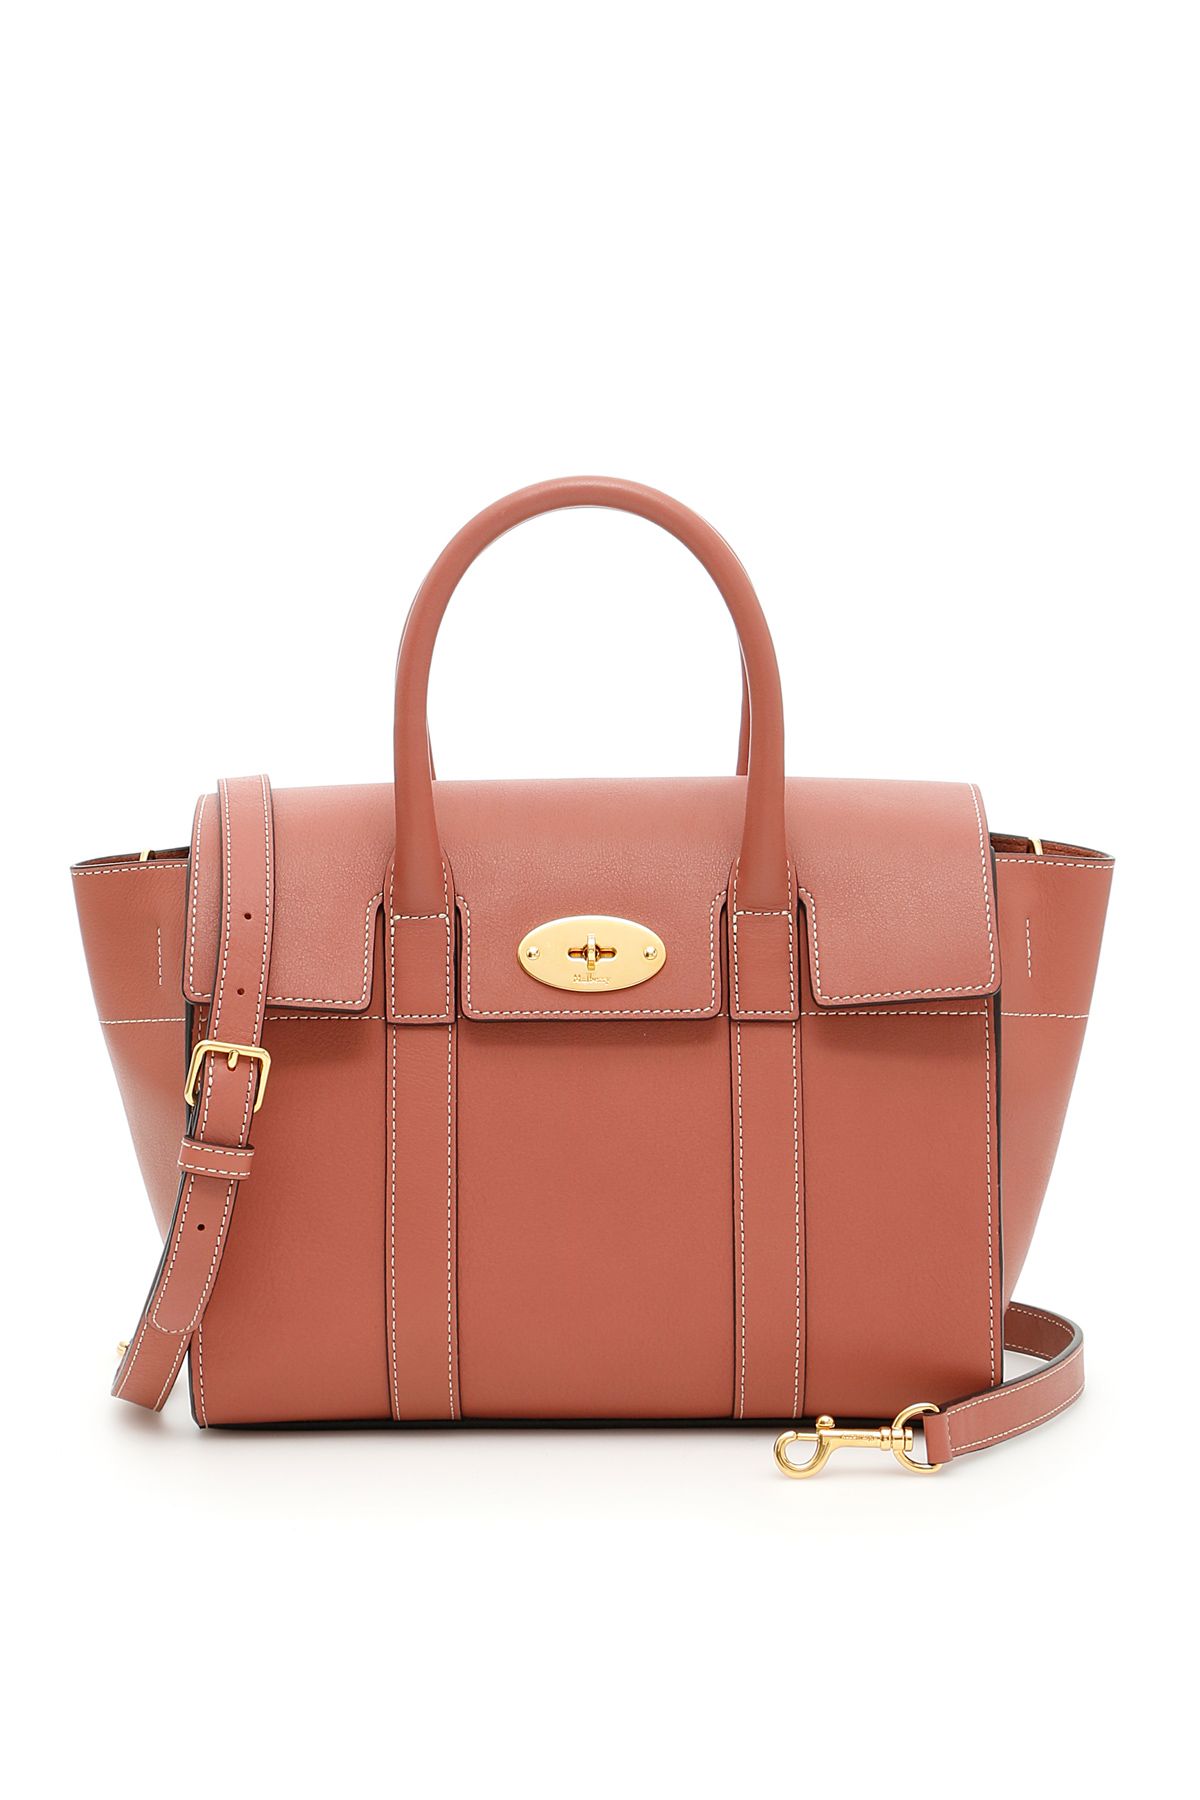 MULBERRY SMALL BAYSWATER BAG, ANTIQUE PINKROSA | ModeSens